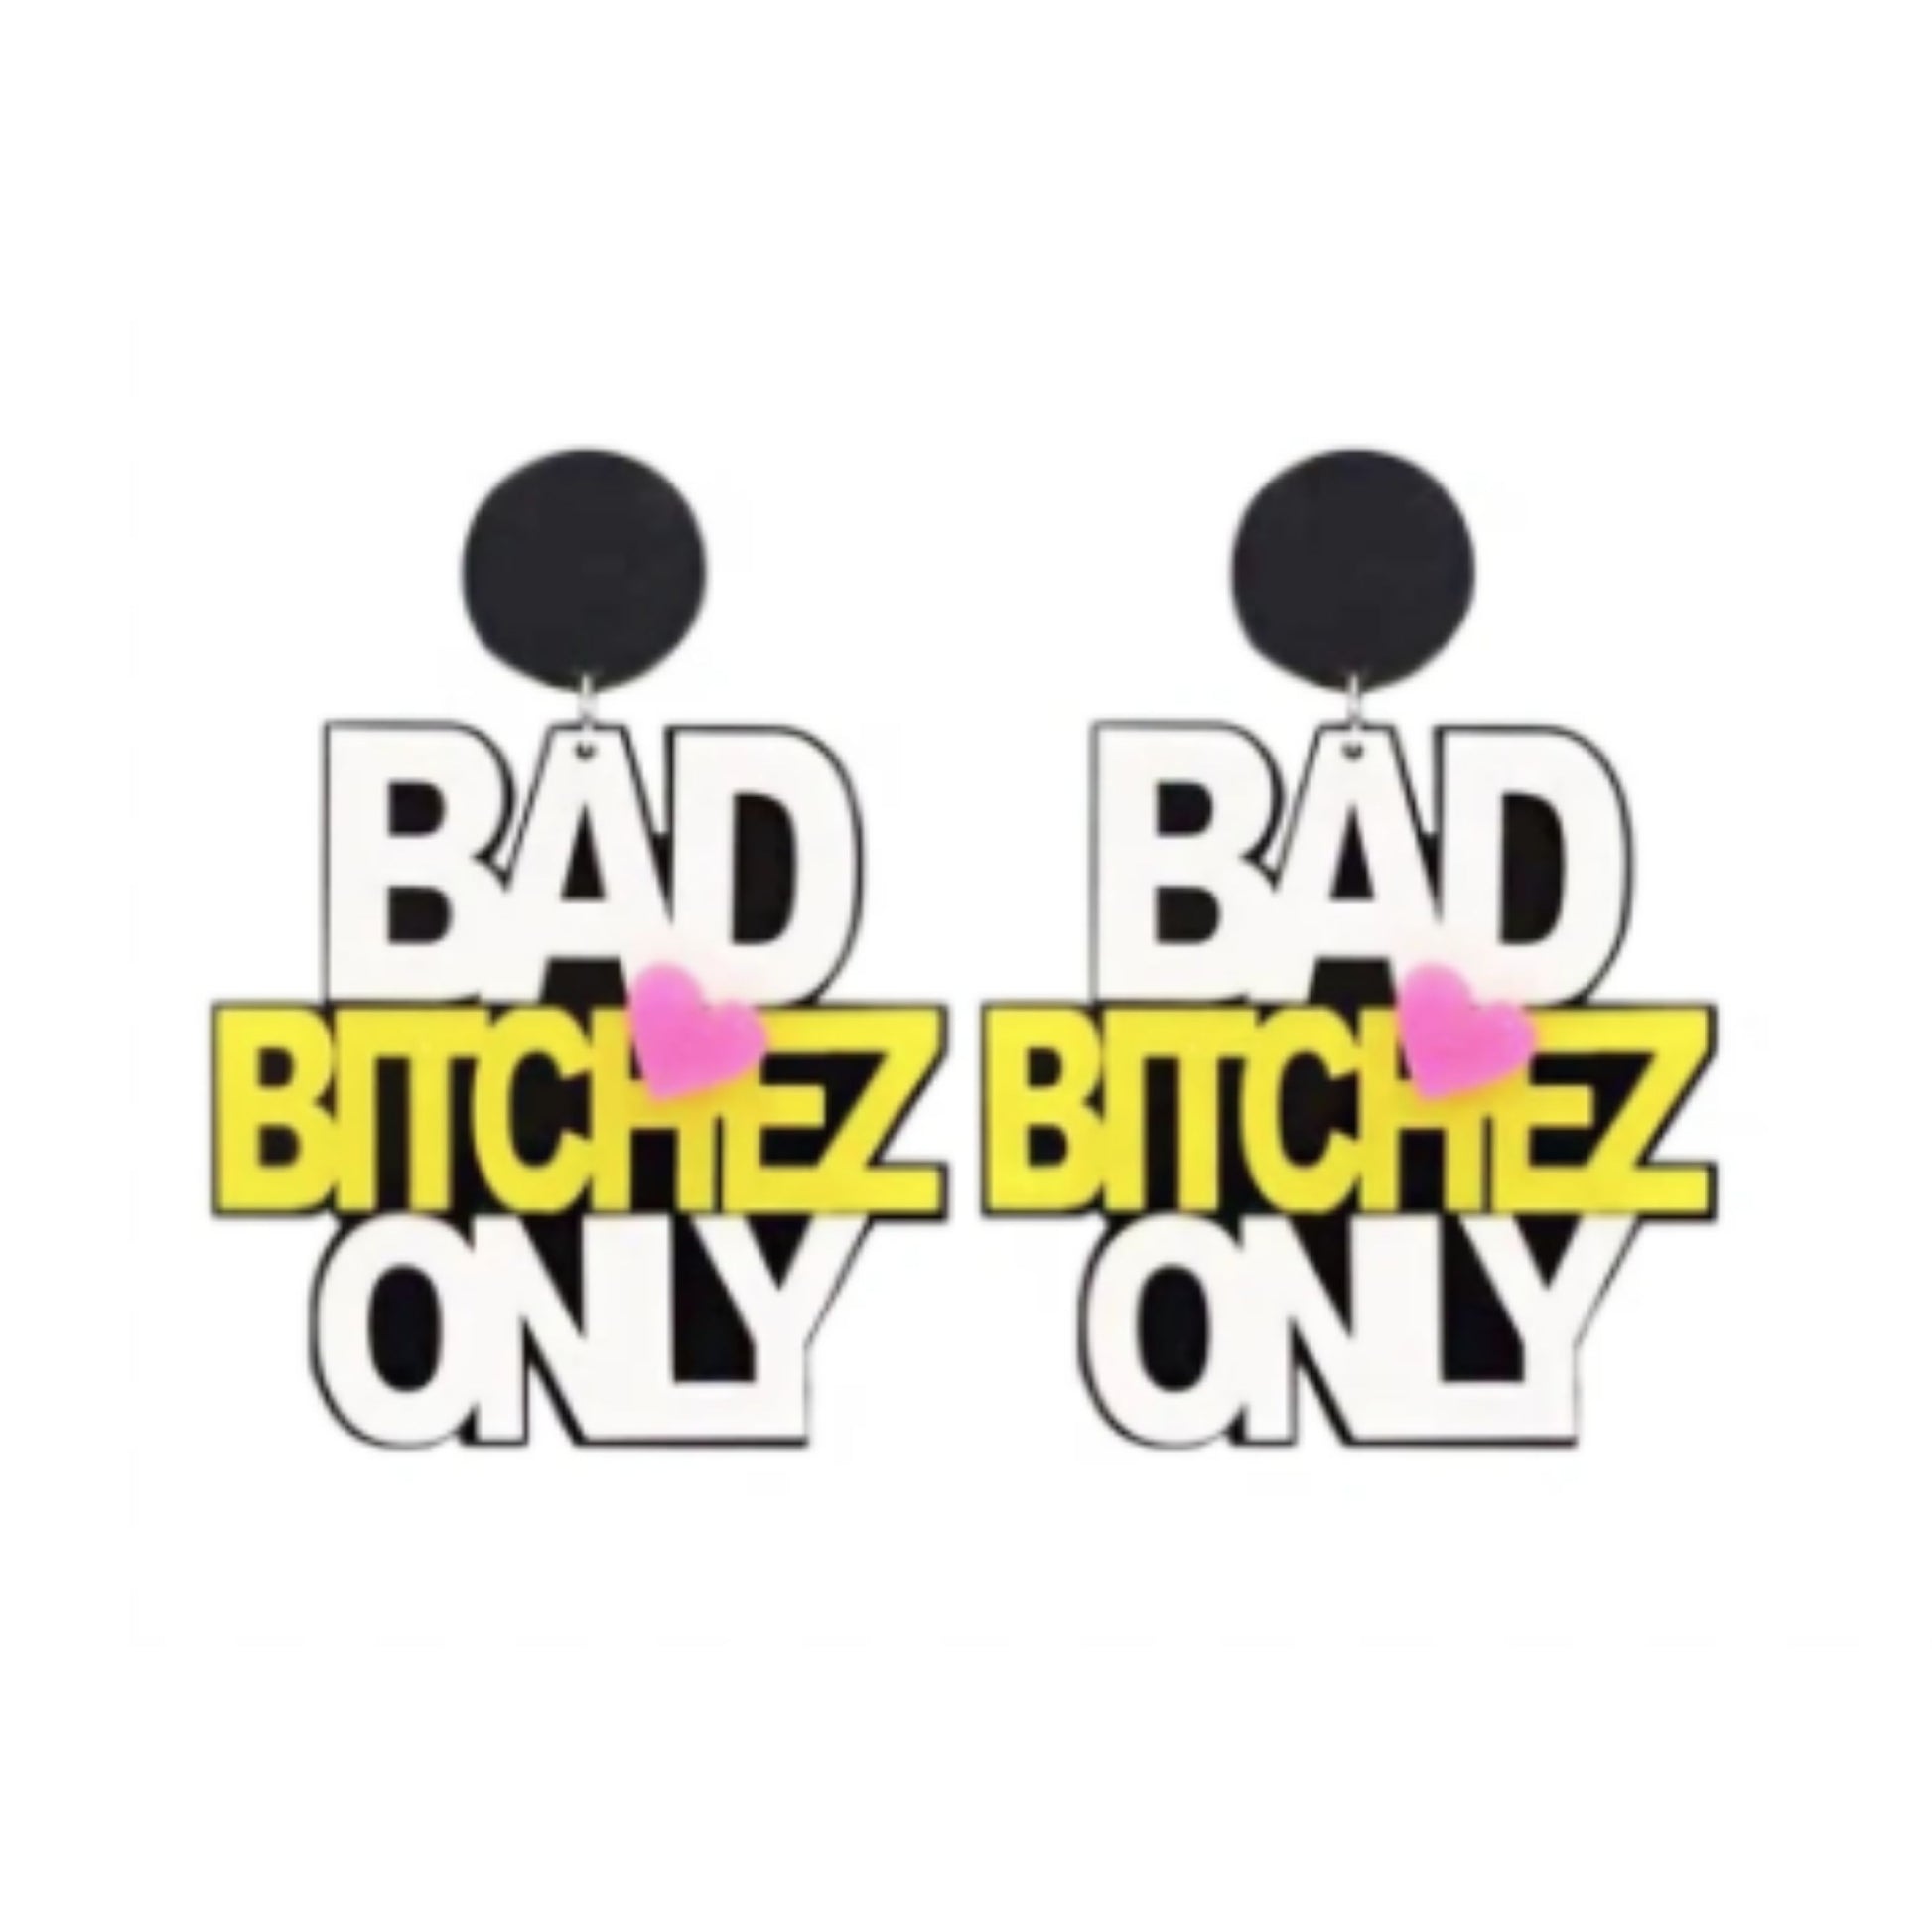 Bad B*tch's Only Statement Earrings